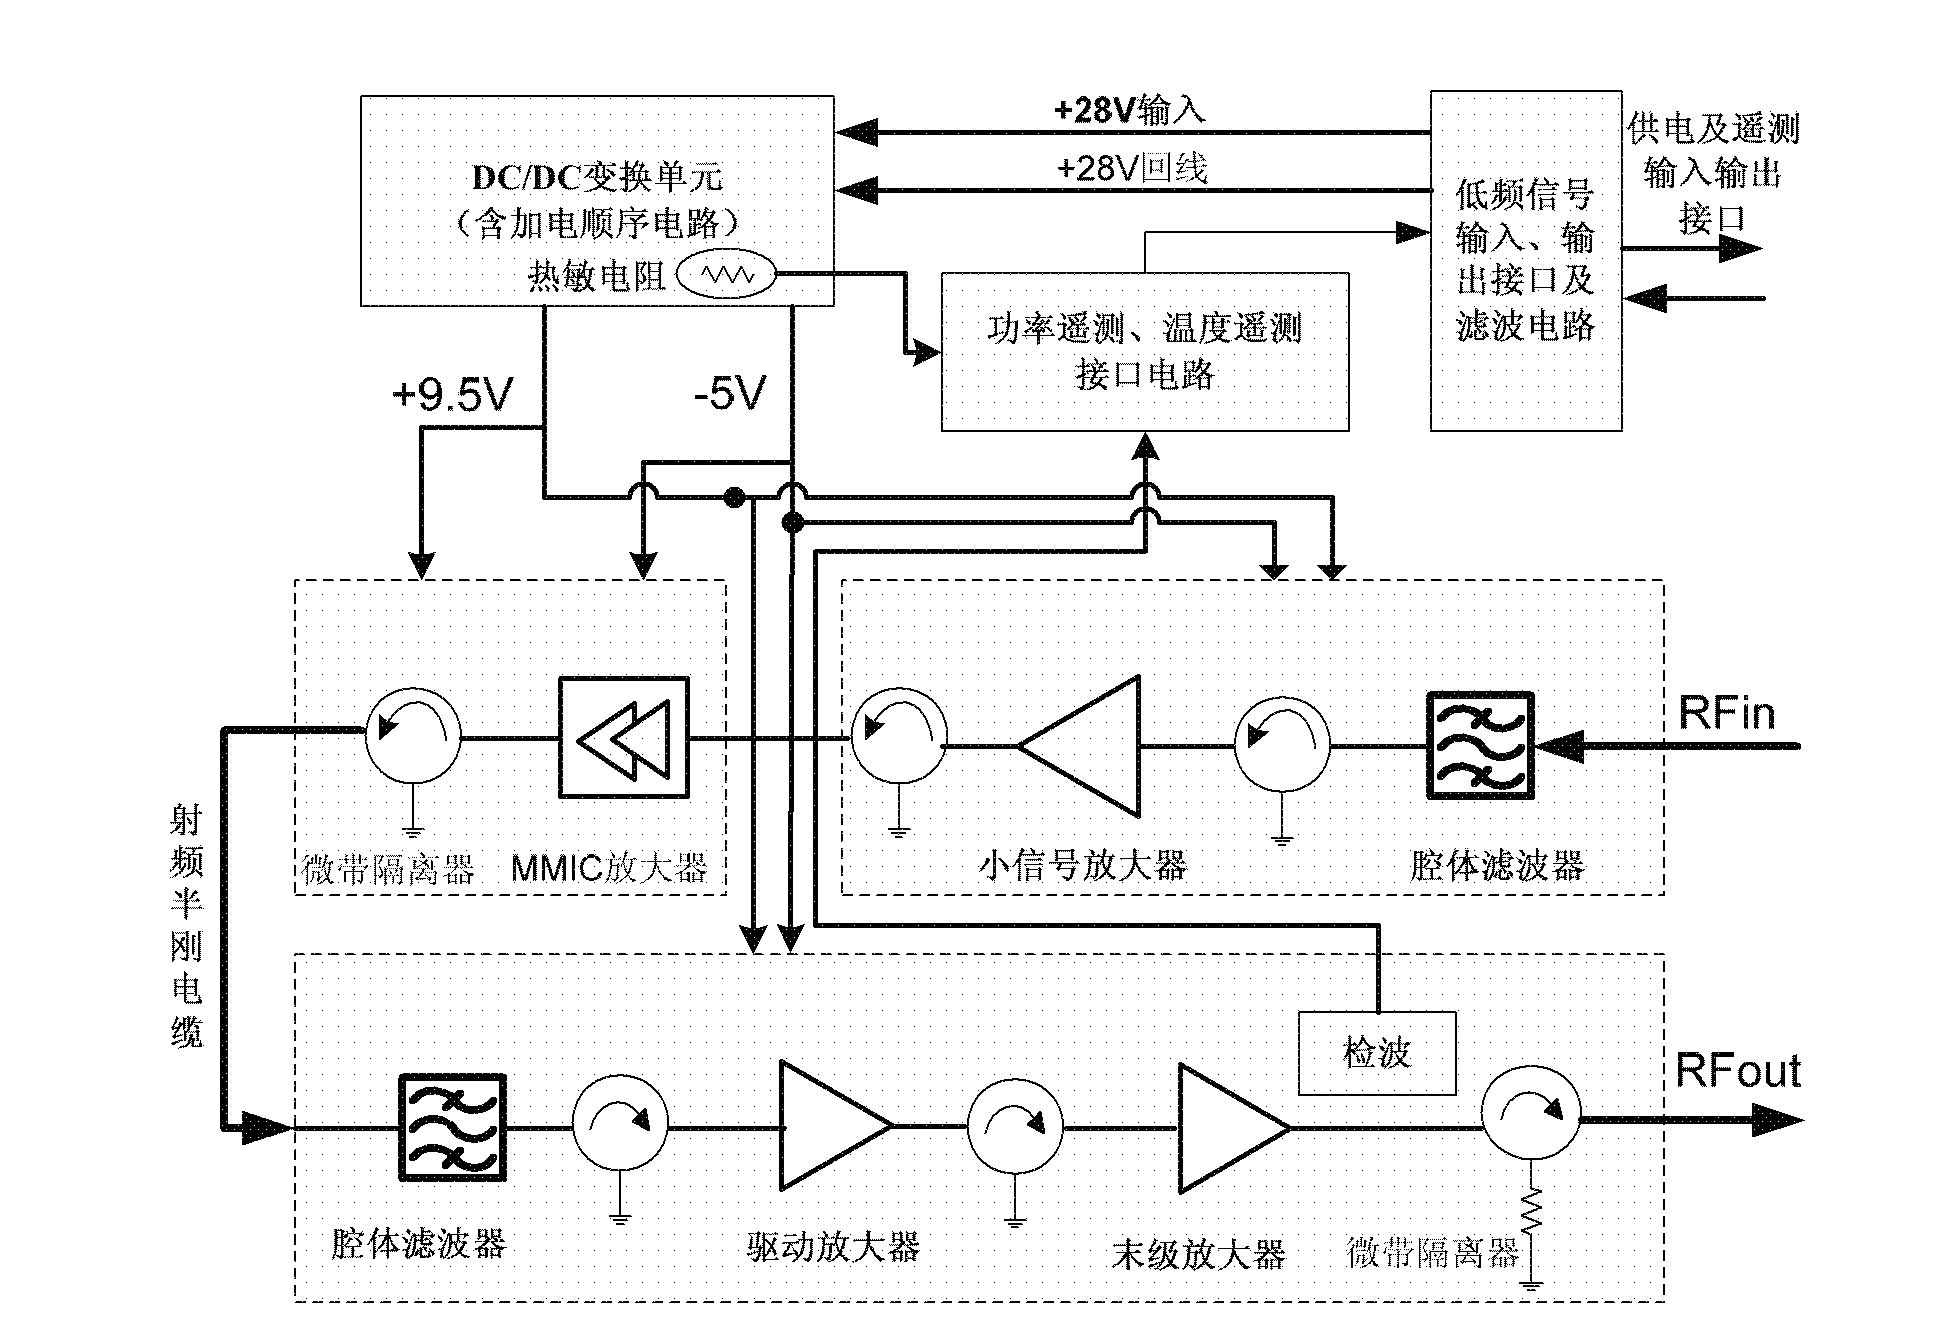 Microwave solid-state power amplifier